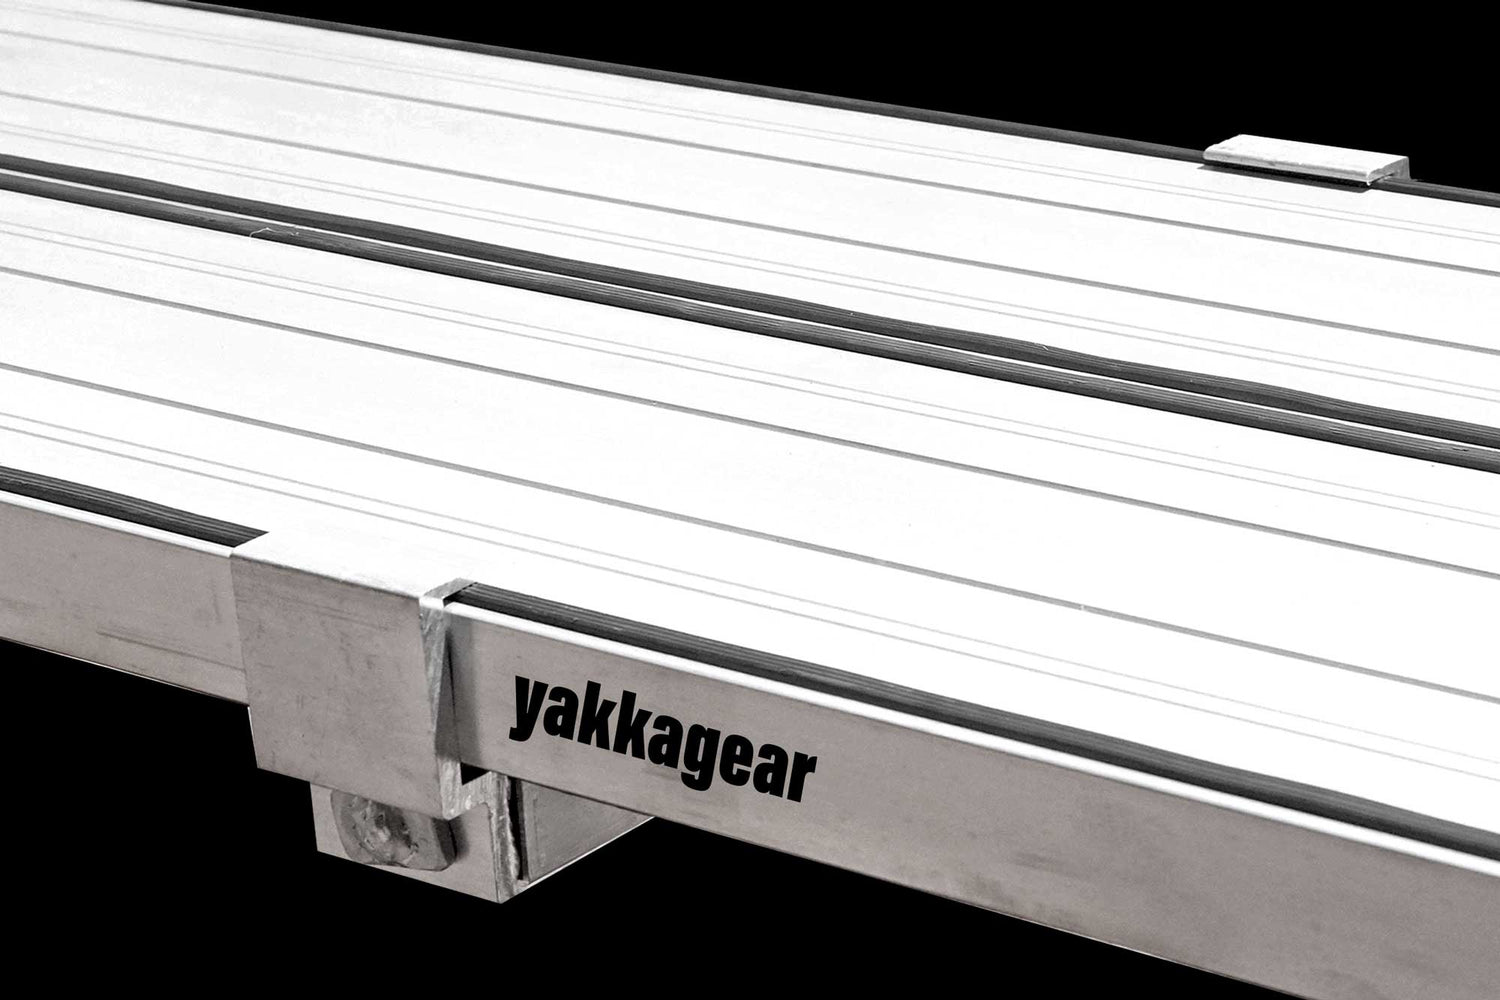 Yakka Gear Australia Plank Clamp being used on two Aluminium Planks as access equipment. Joins two planks together to make the work platform twice as wide and twice as stable. Used on all sized planks including 2.5m, 3m, 3.6m, 4m, 5m and 6m planks. View from above with black background. 